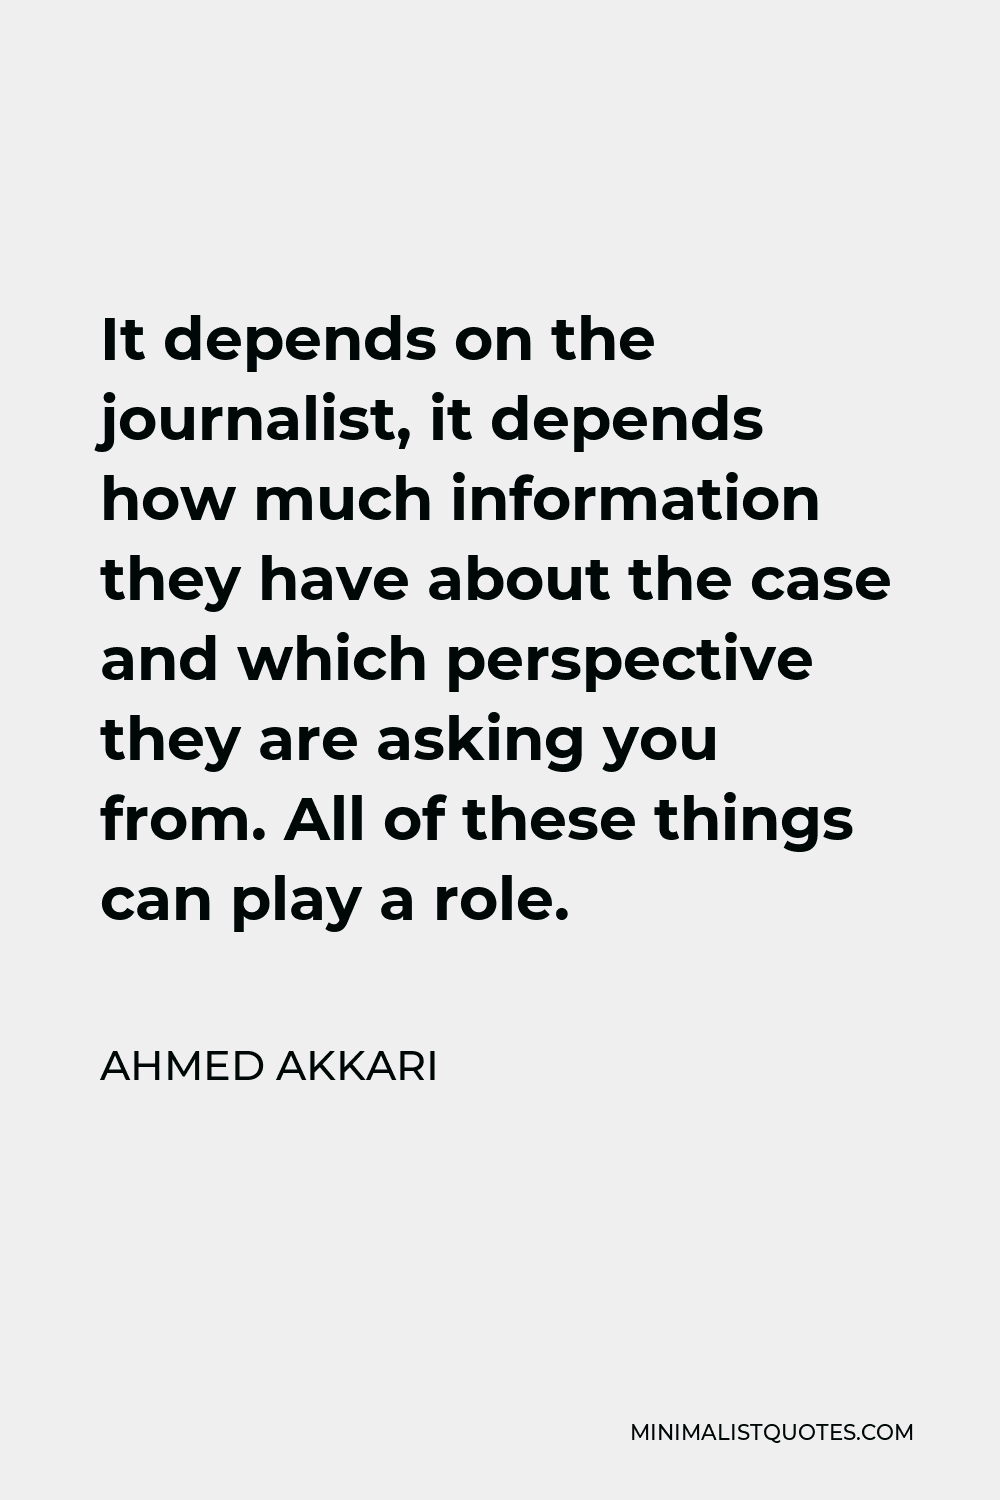 Ahmed Akkari Quote - It depends on the journalist, it depends how much information they have about the case and which perspective they are asking you from. All of these things can play a role.